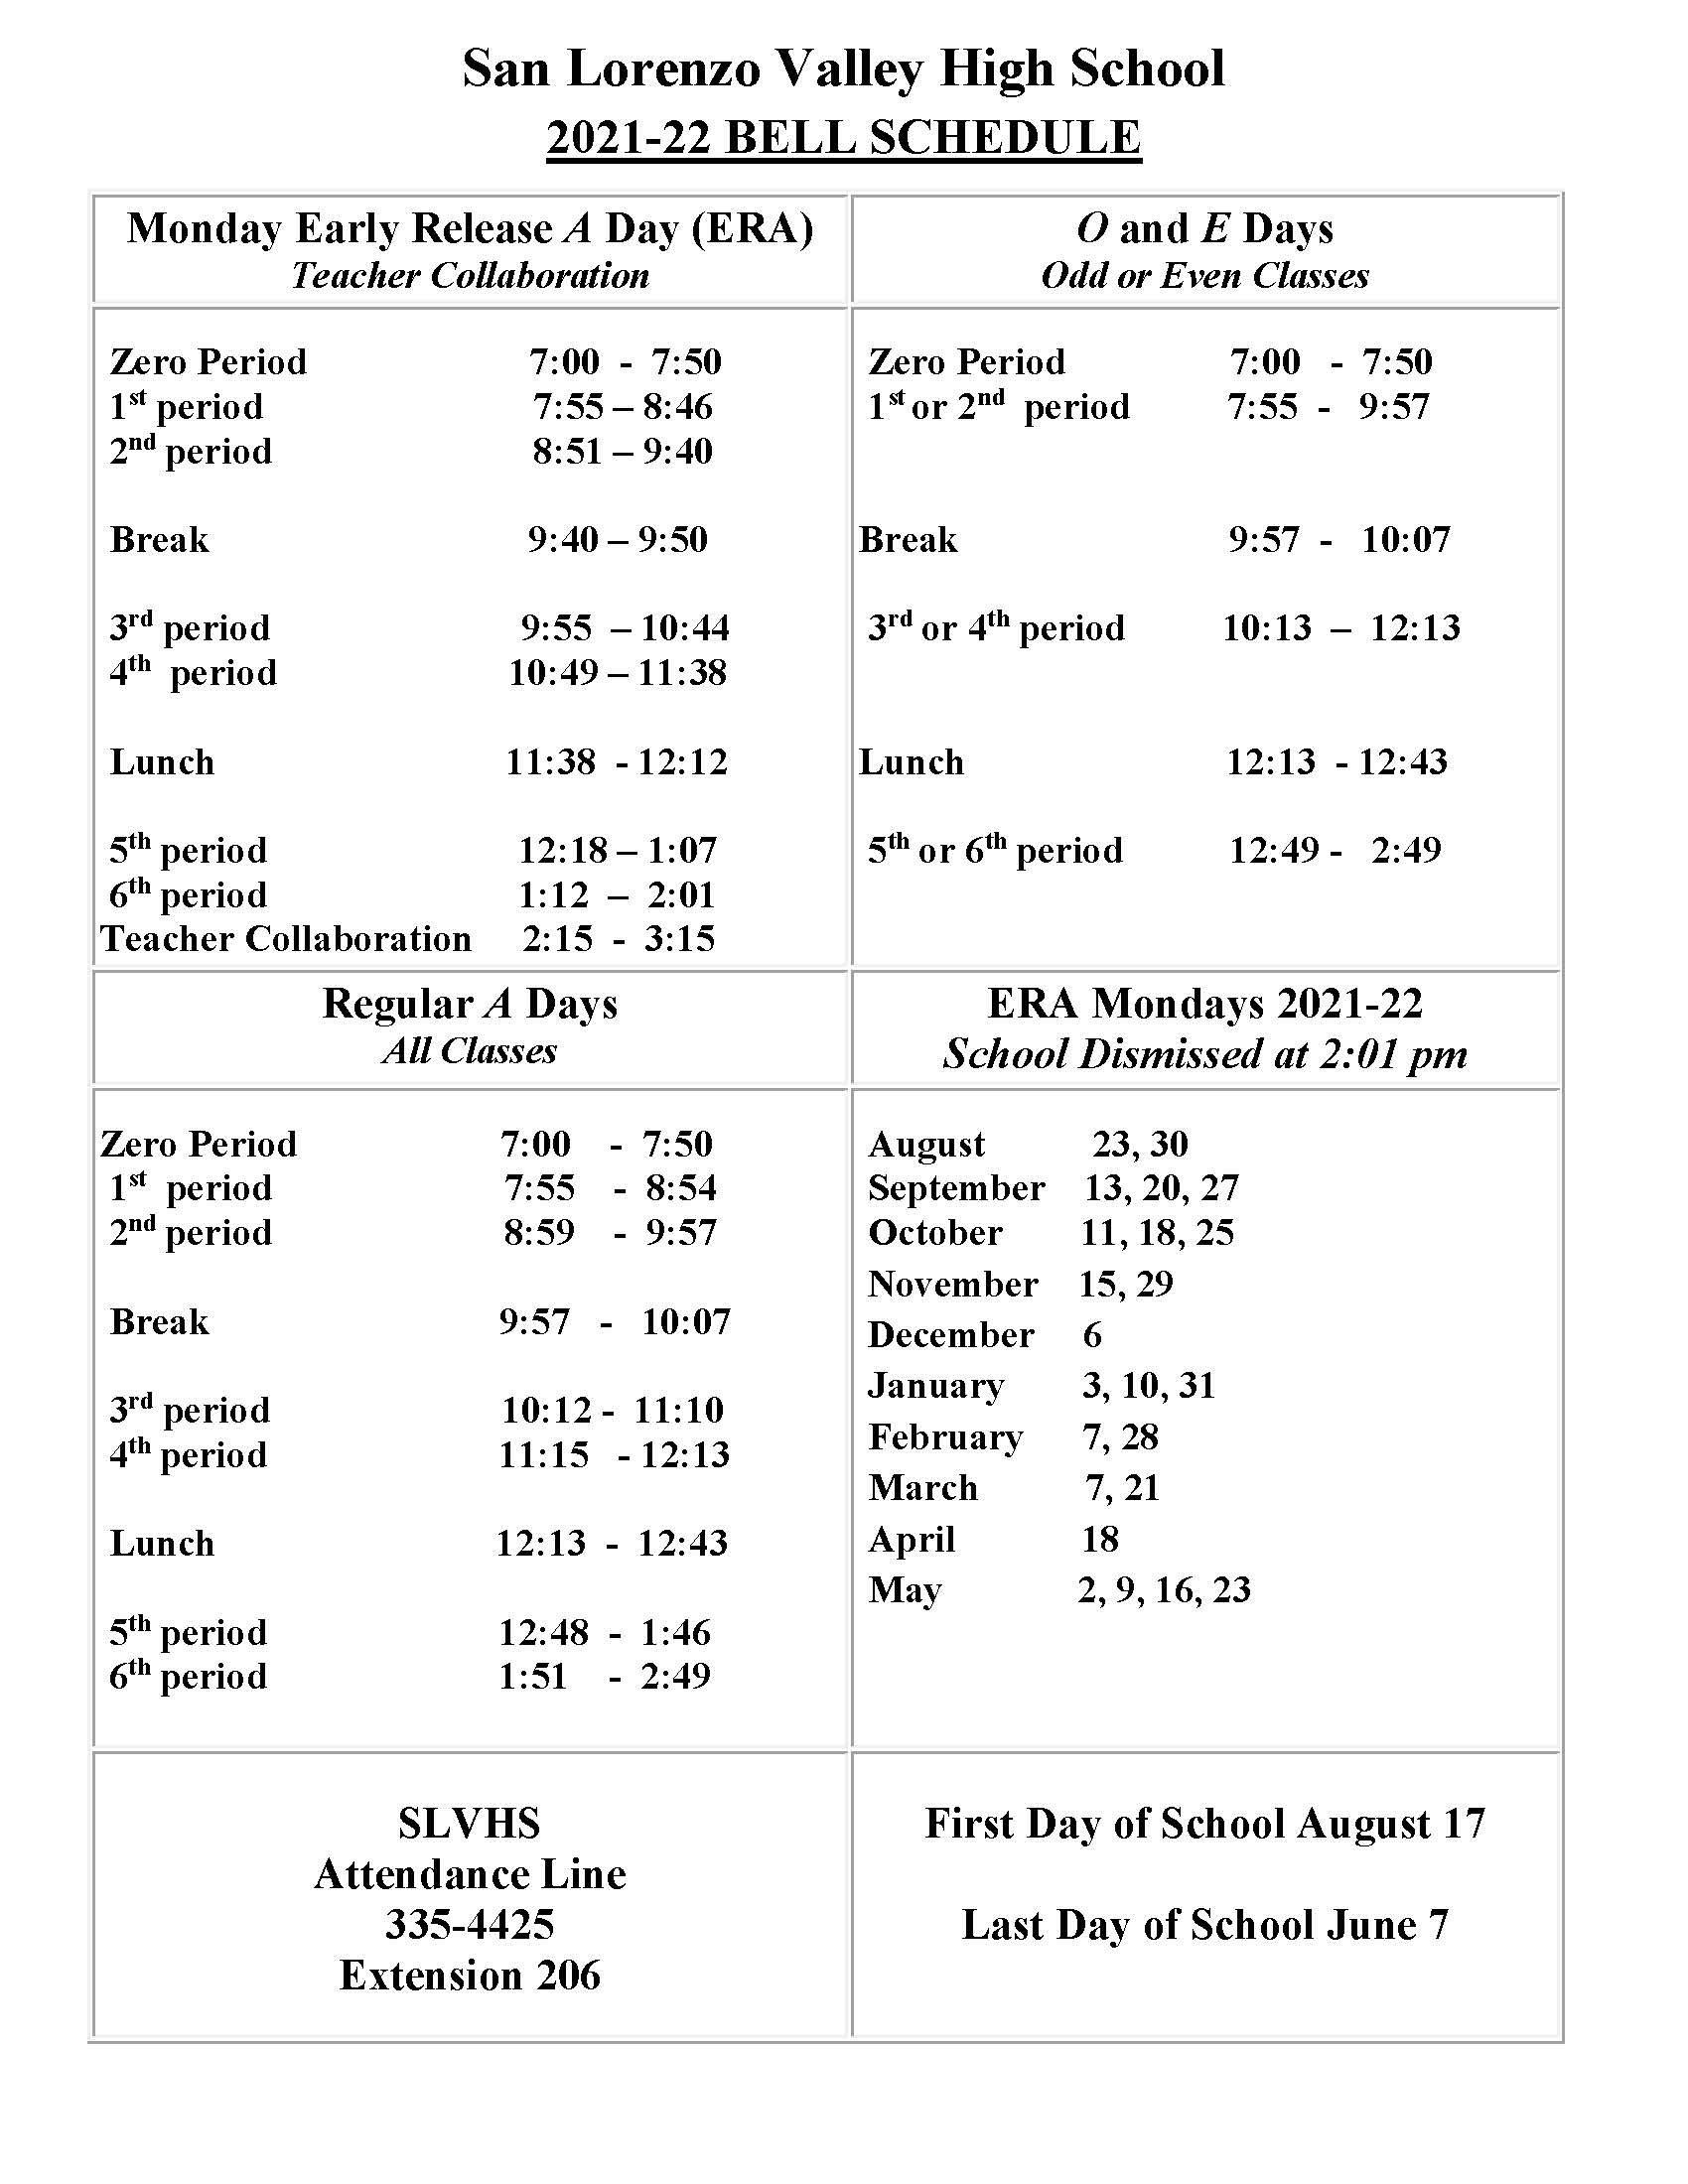 bell schedule; for details call 831-335-4425 x 201